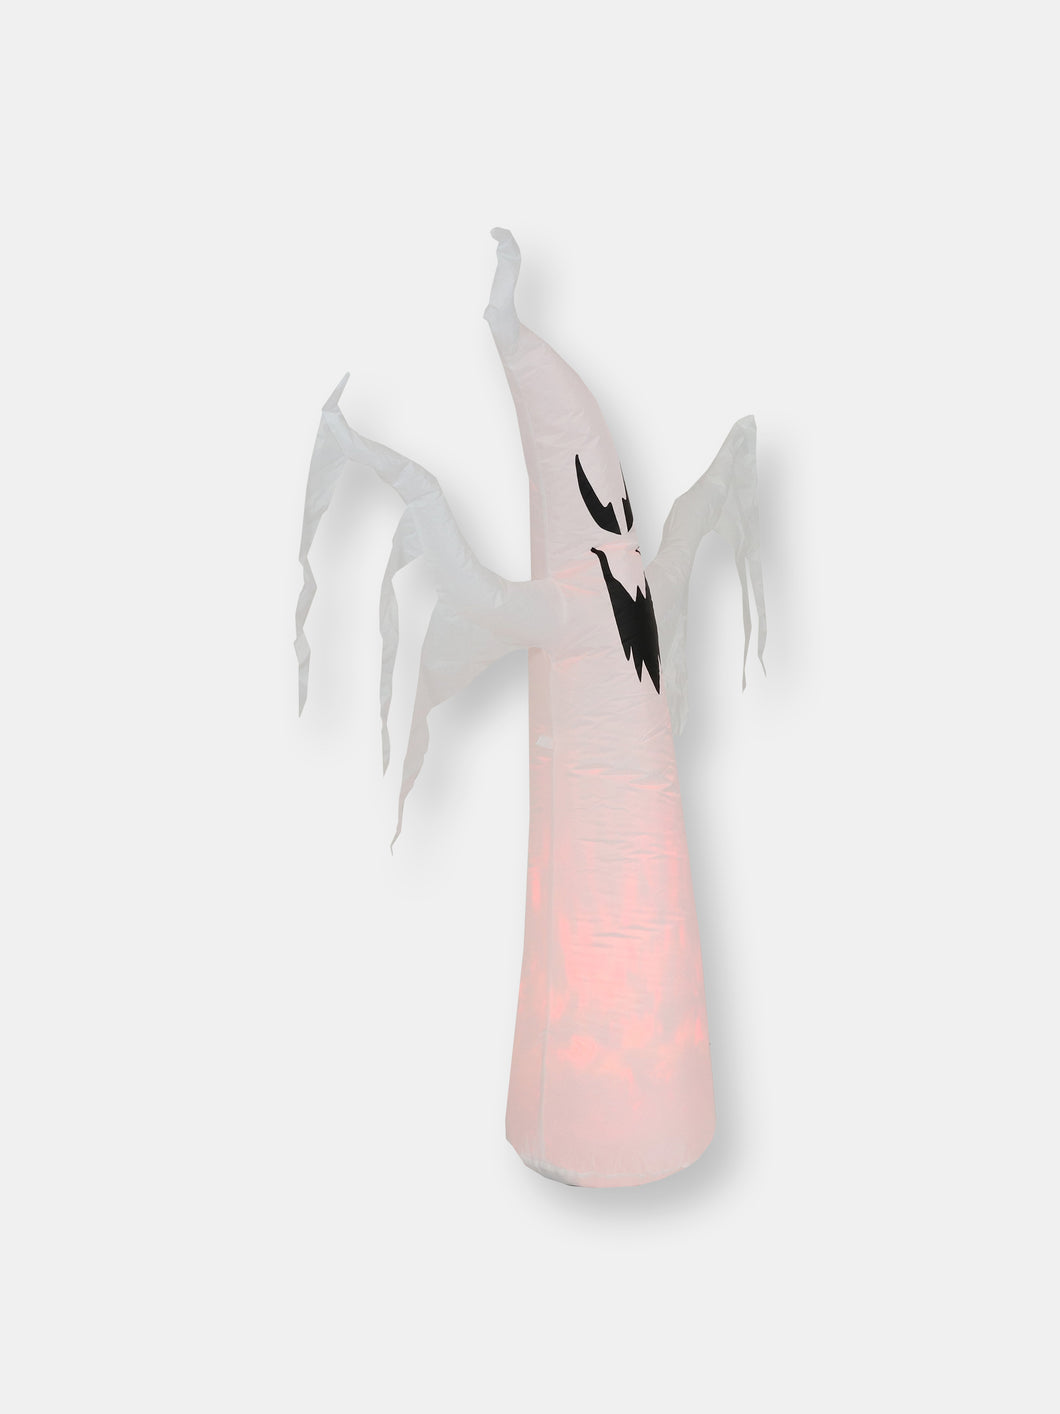 Spooky Red Glowing Ghost Inflatable Halloween Decoration